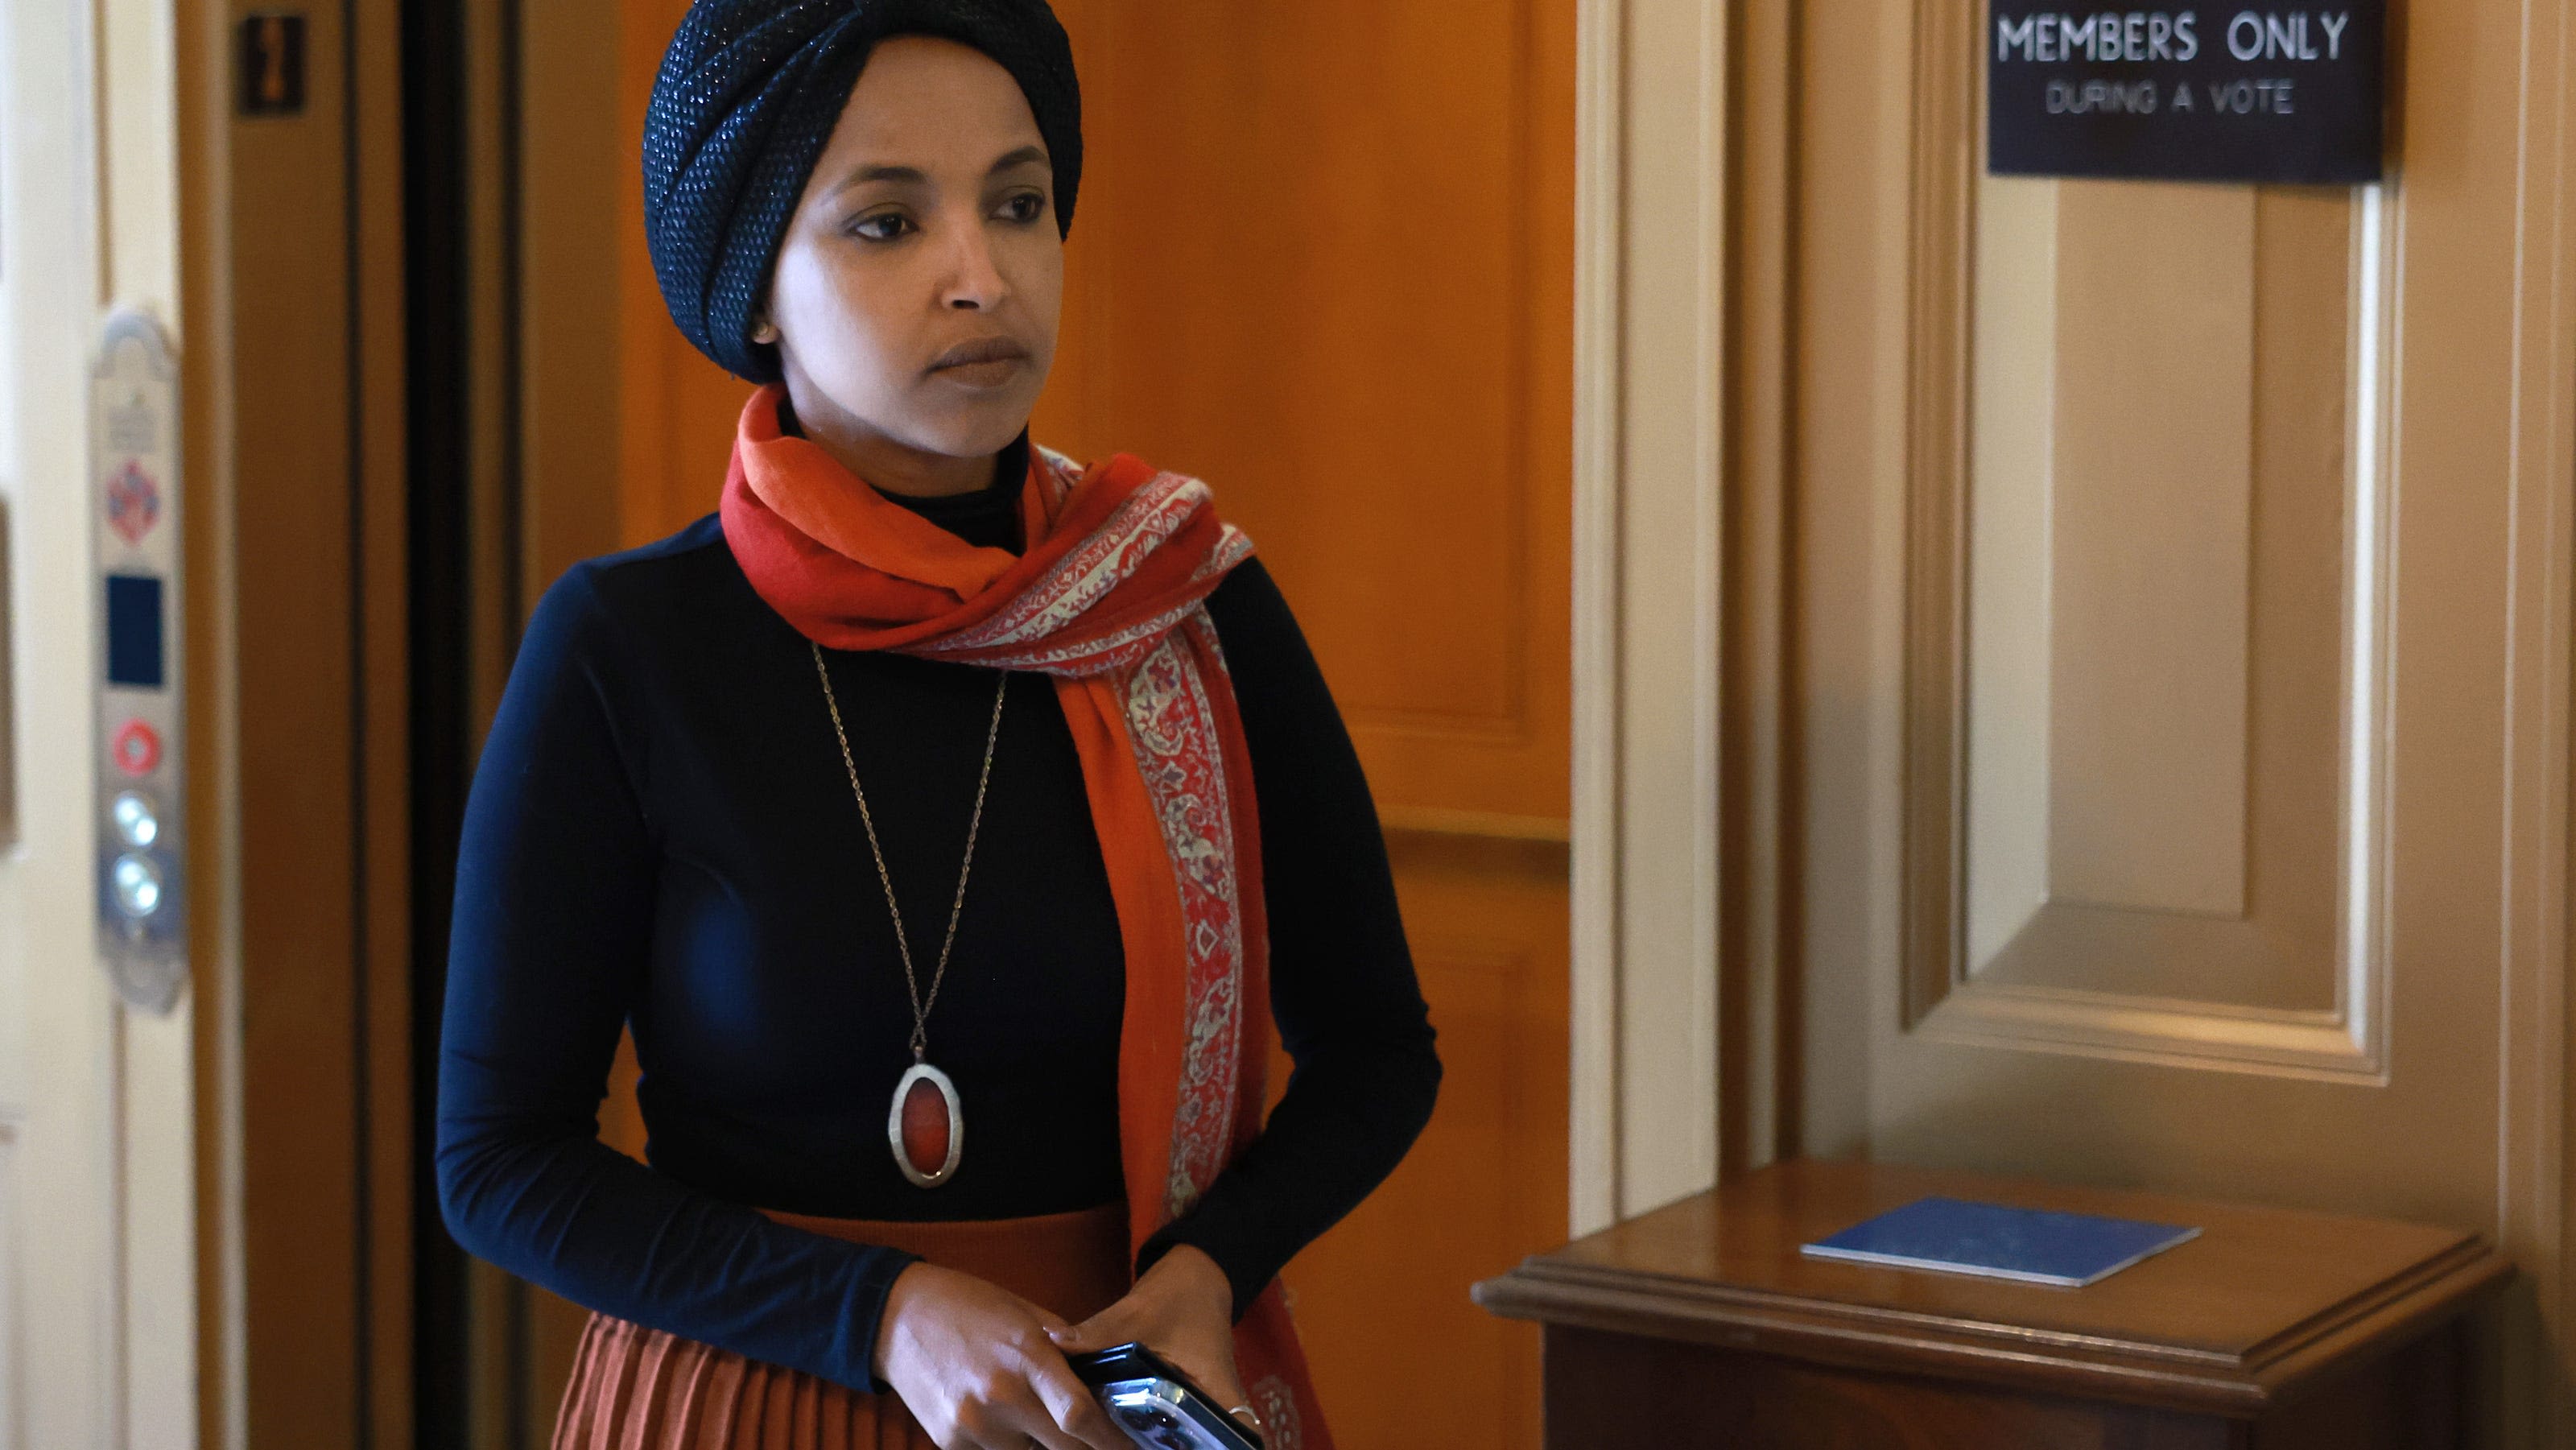 No, Rep. Ilhan Omar didn't say 'Get rid of the Jews to end antisemitism' | Fact check